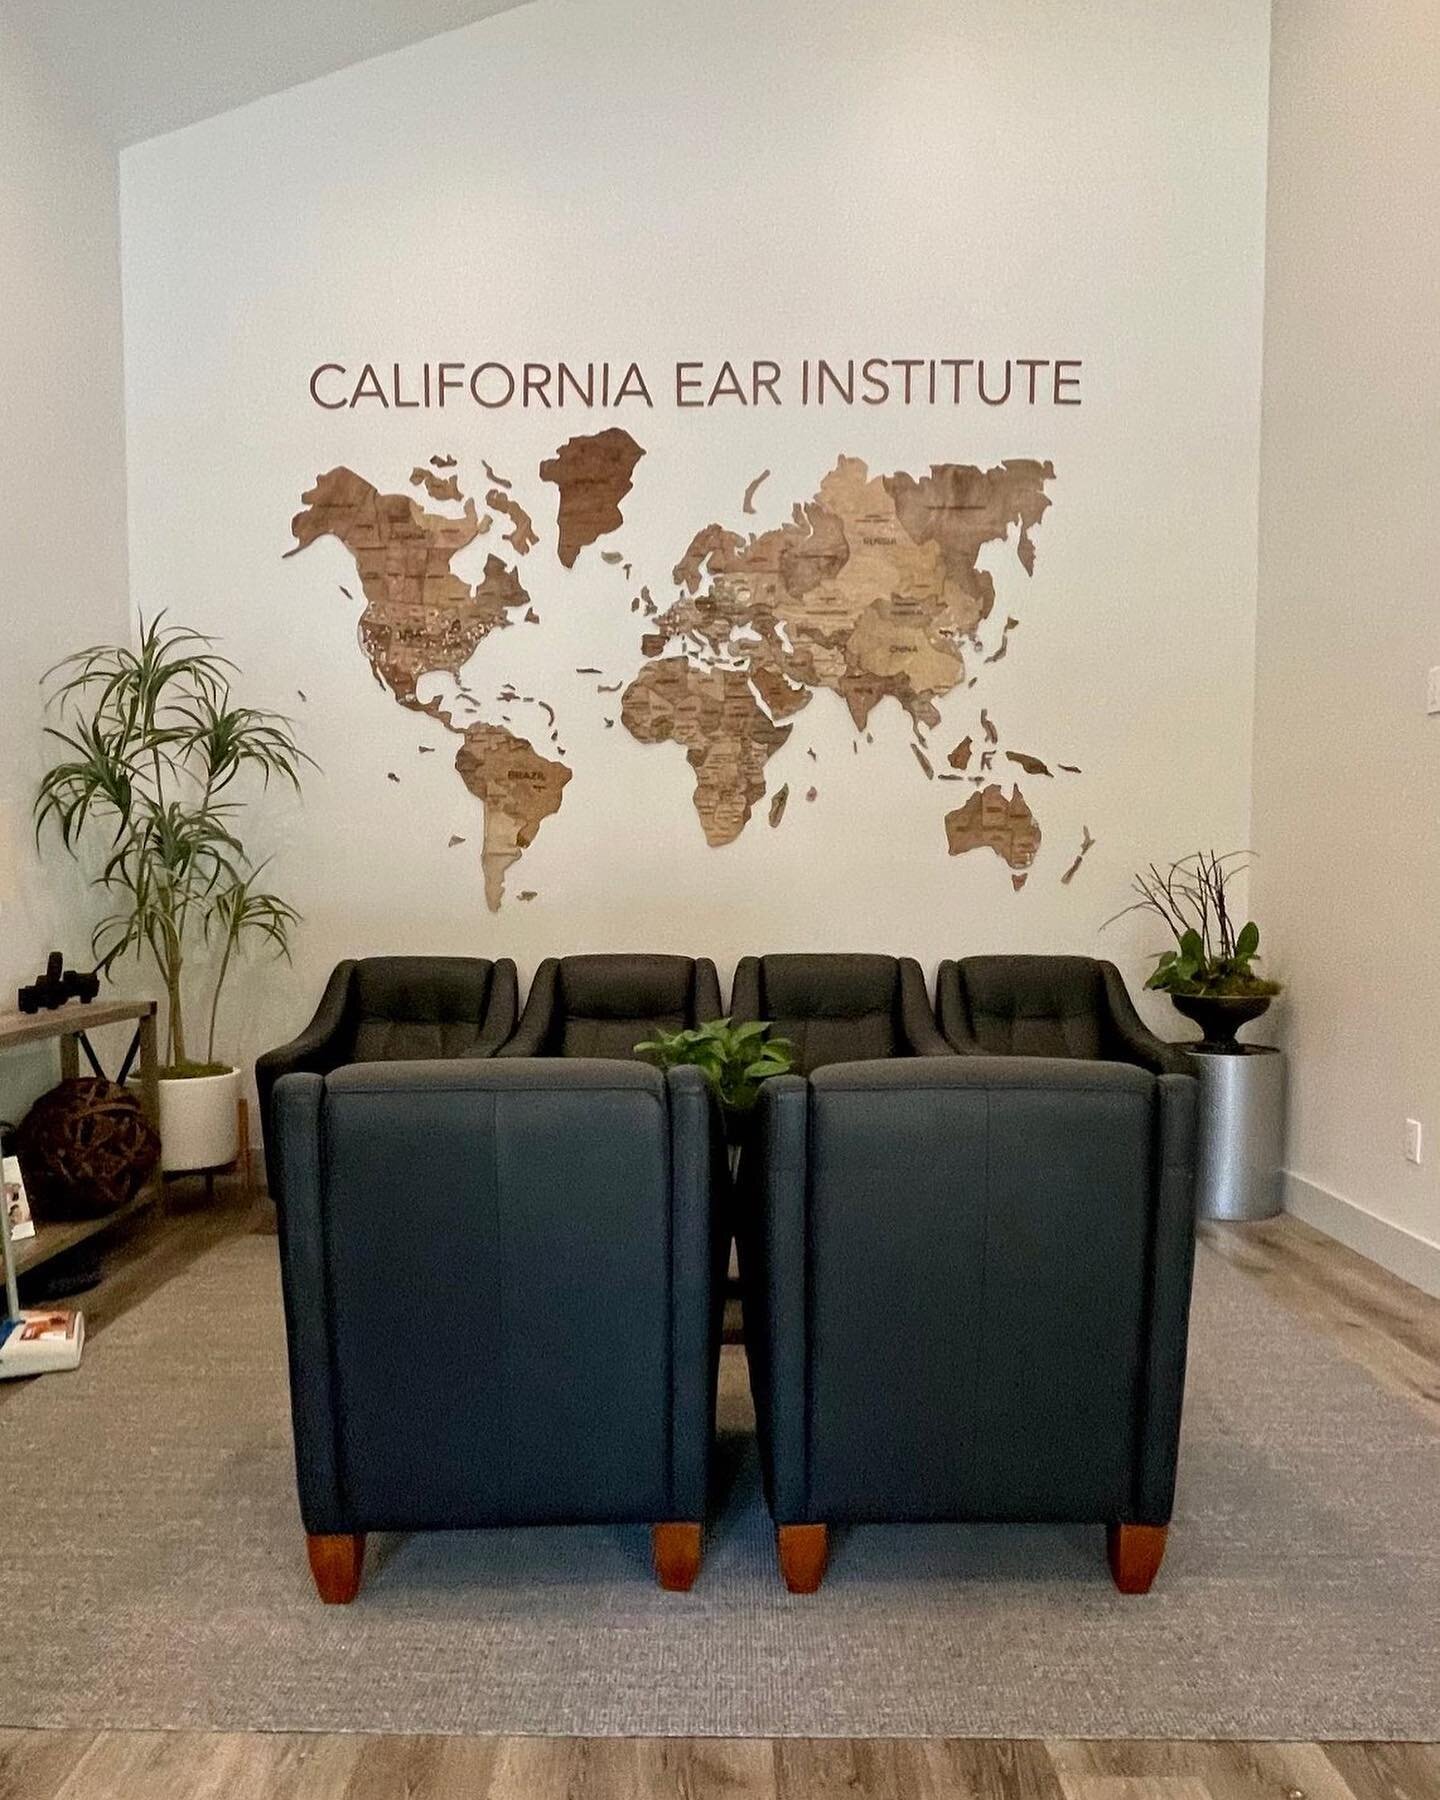 Putting some finishing touches on our new reception area today. Swipe 👉🏻 for a time lapse! We&rsquo;re excited for the many photos that will be taken here with patients from all over the world. 🤩 #atresia #microtia #surgery #microtiaatresia #micro